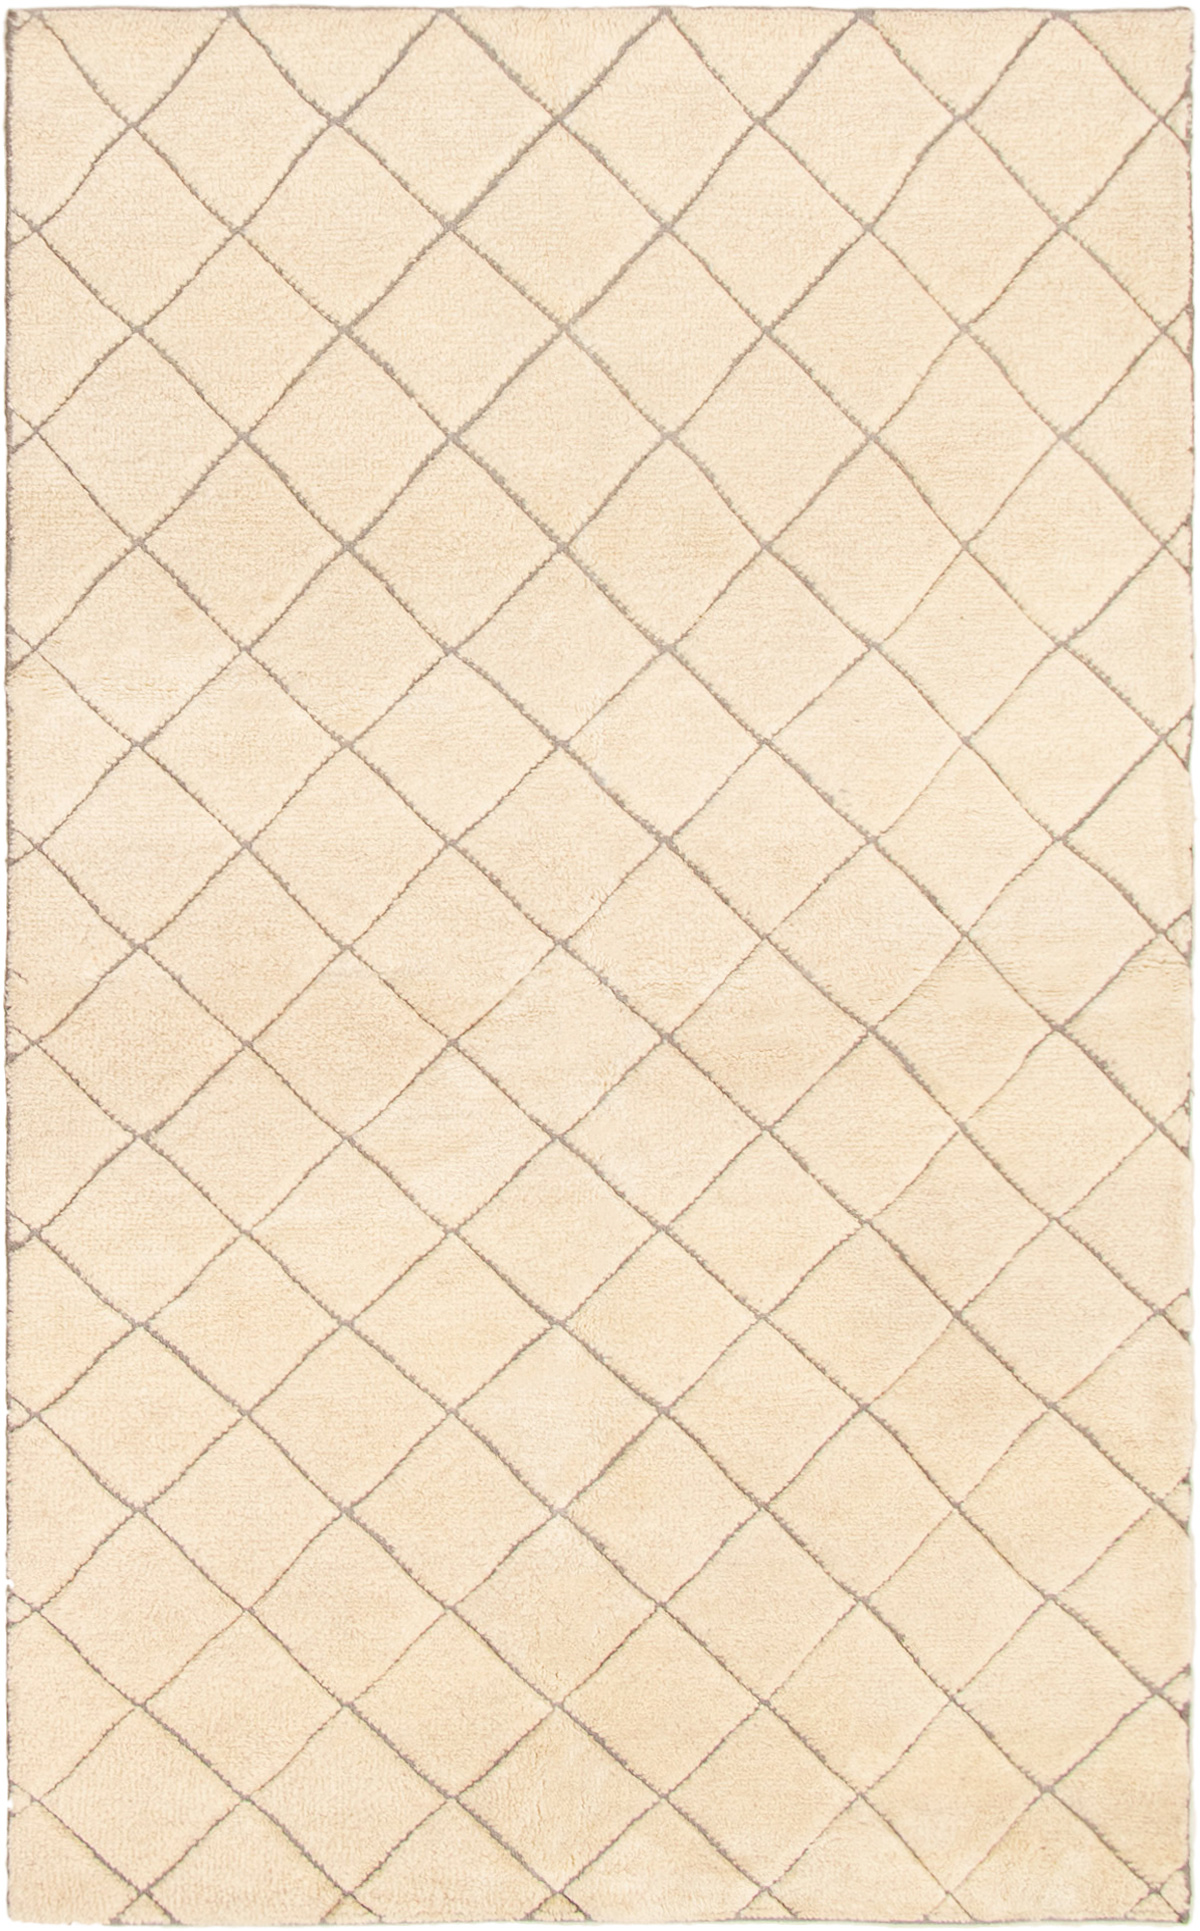 Hand-knotted Arlequin Cream Wool Rug 4'10" x 7'10"  Size: 4'10" x 7'10"  